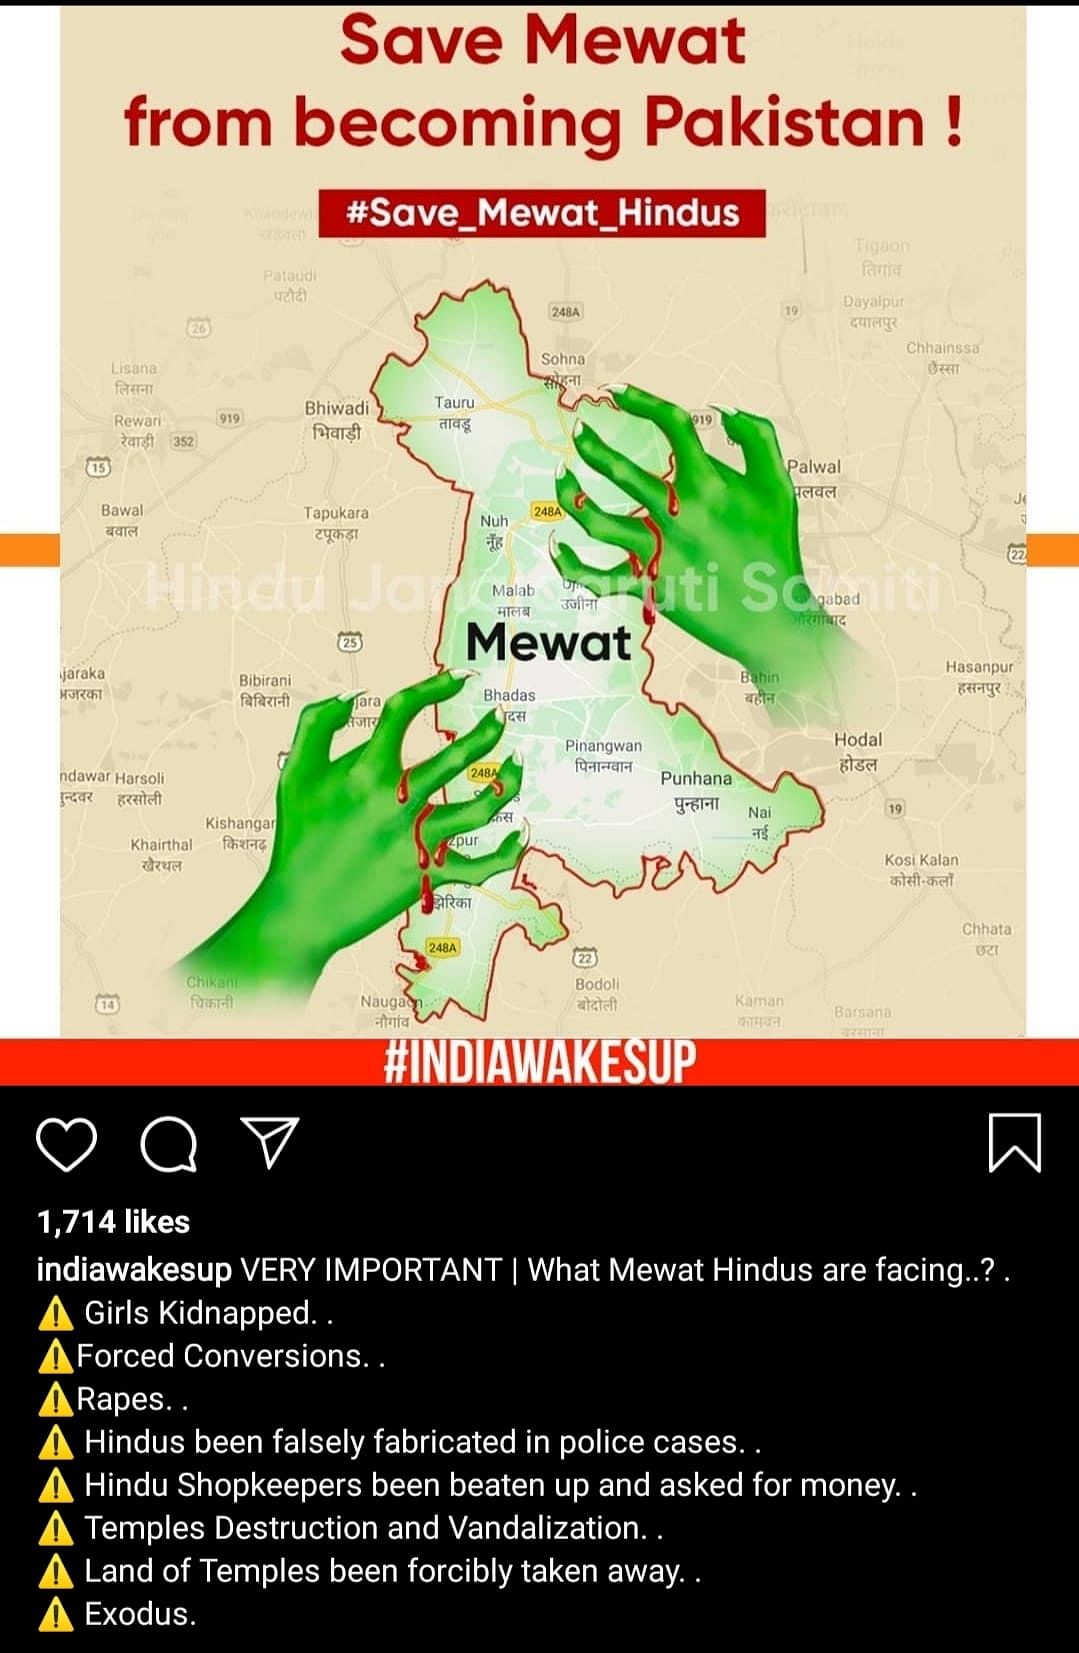 Why do Hindutva outfits have a disproportionate focus on Mewat?